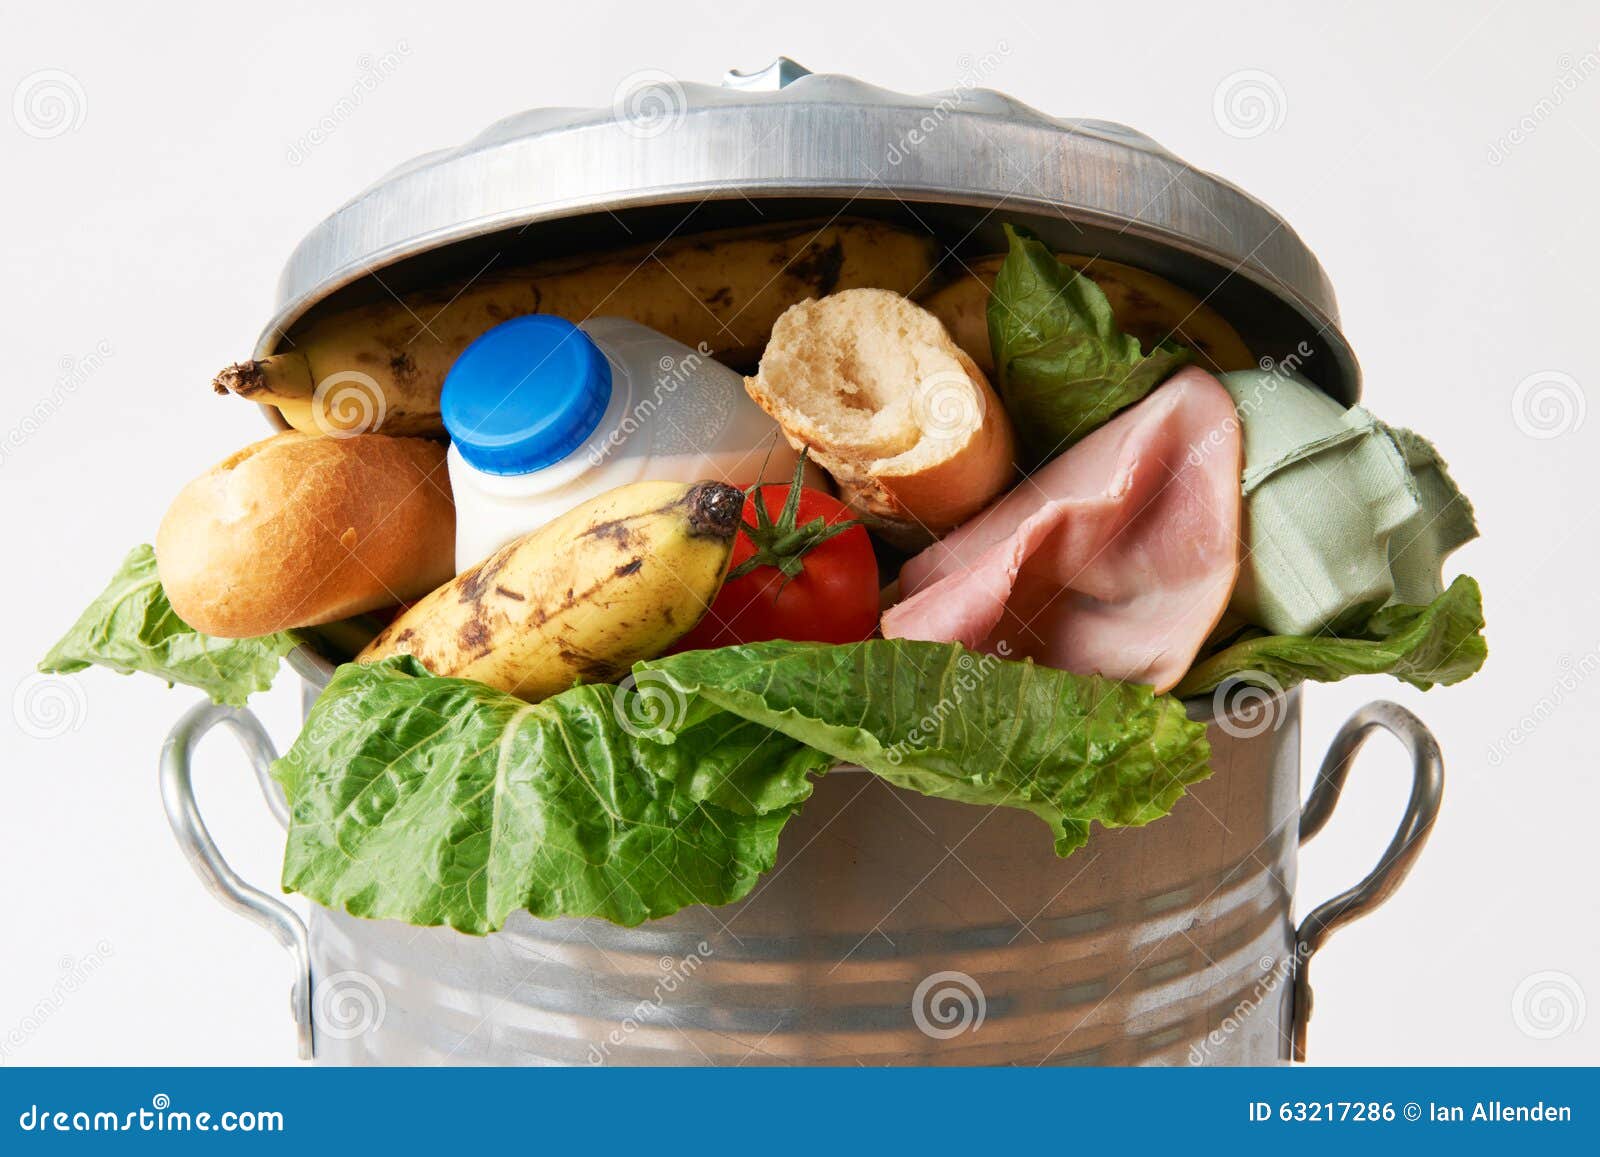 fresh food in garbage can to illustrate waste